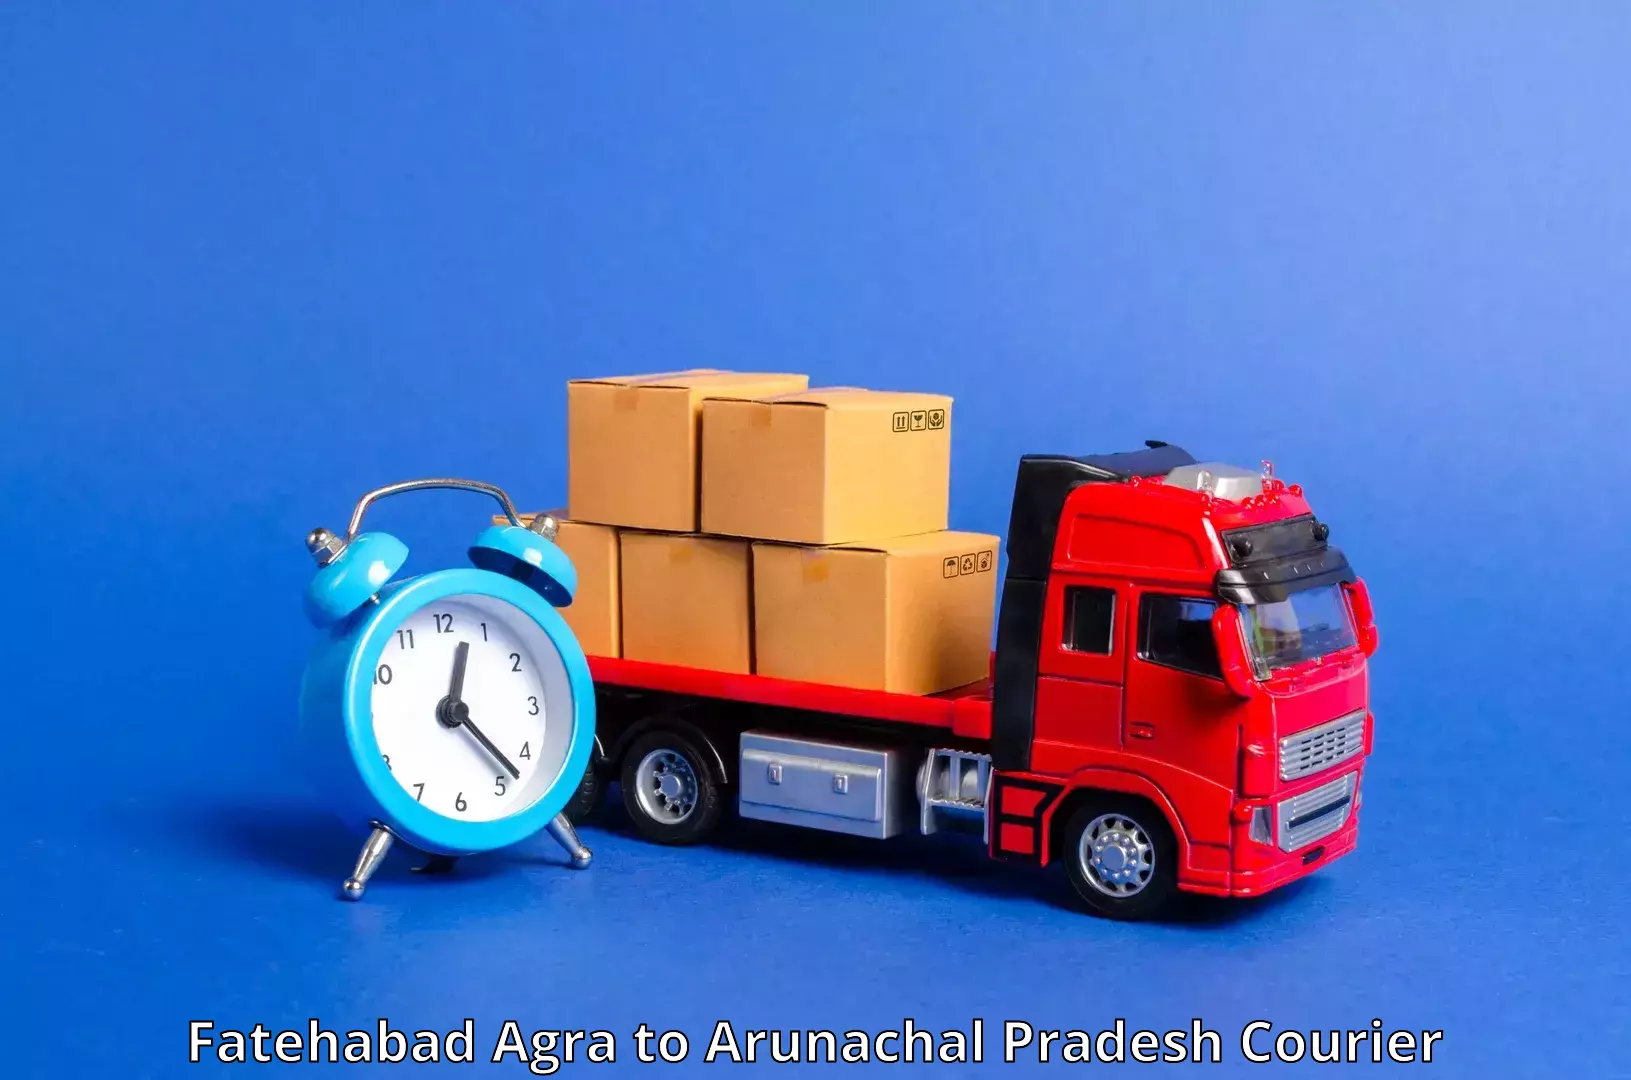 State-of-the-art courier technology Fatehabad Agra to Deomali